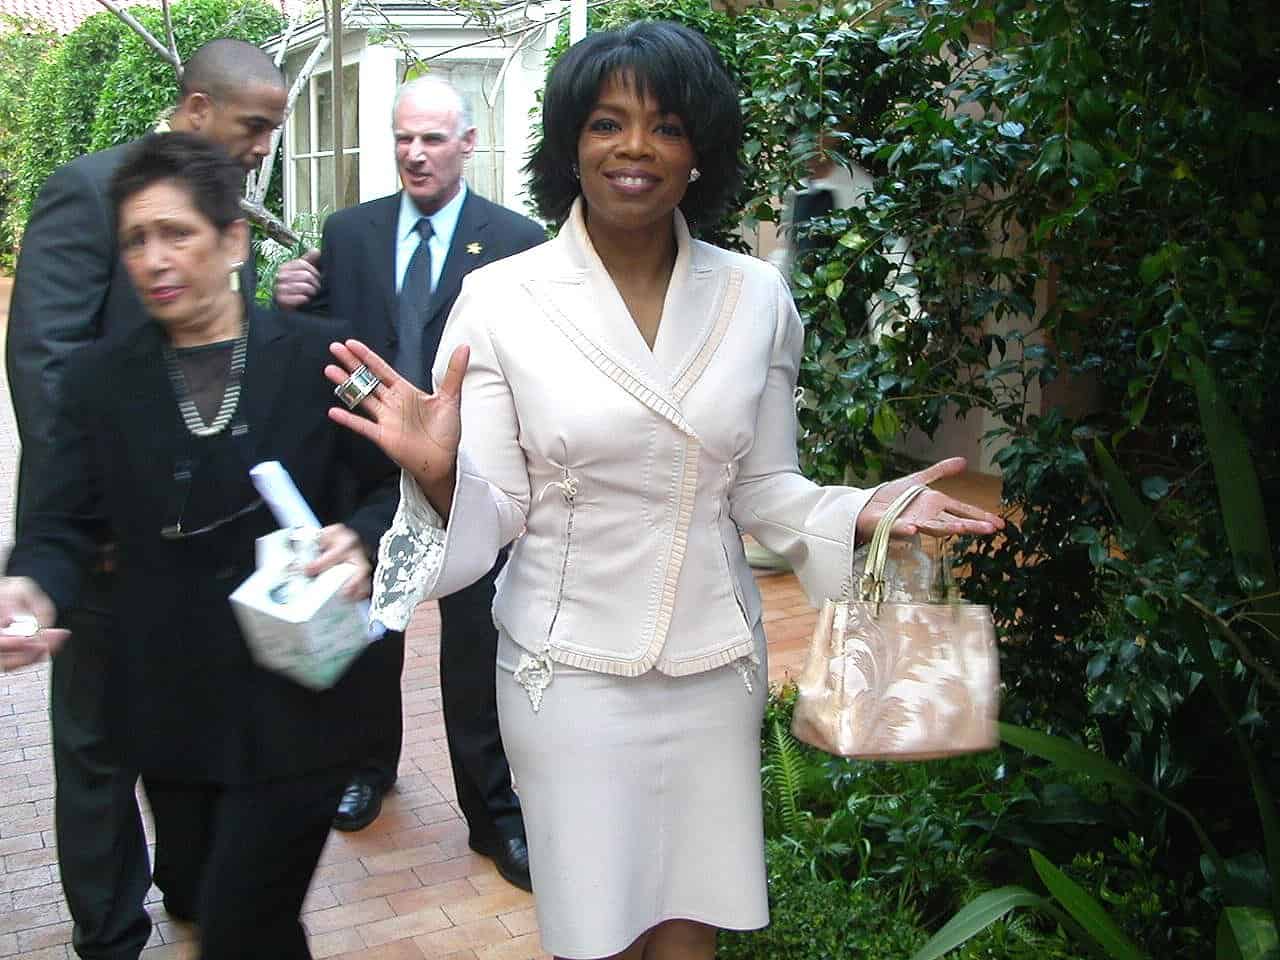 Apple just landed Oprah Winfrey, the "Queen of All Media," for a multi-year content deal to create new Apple TV+ shows.